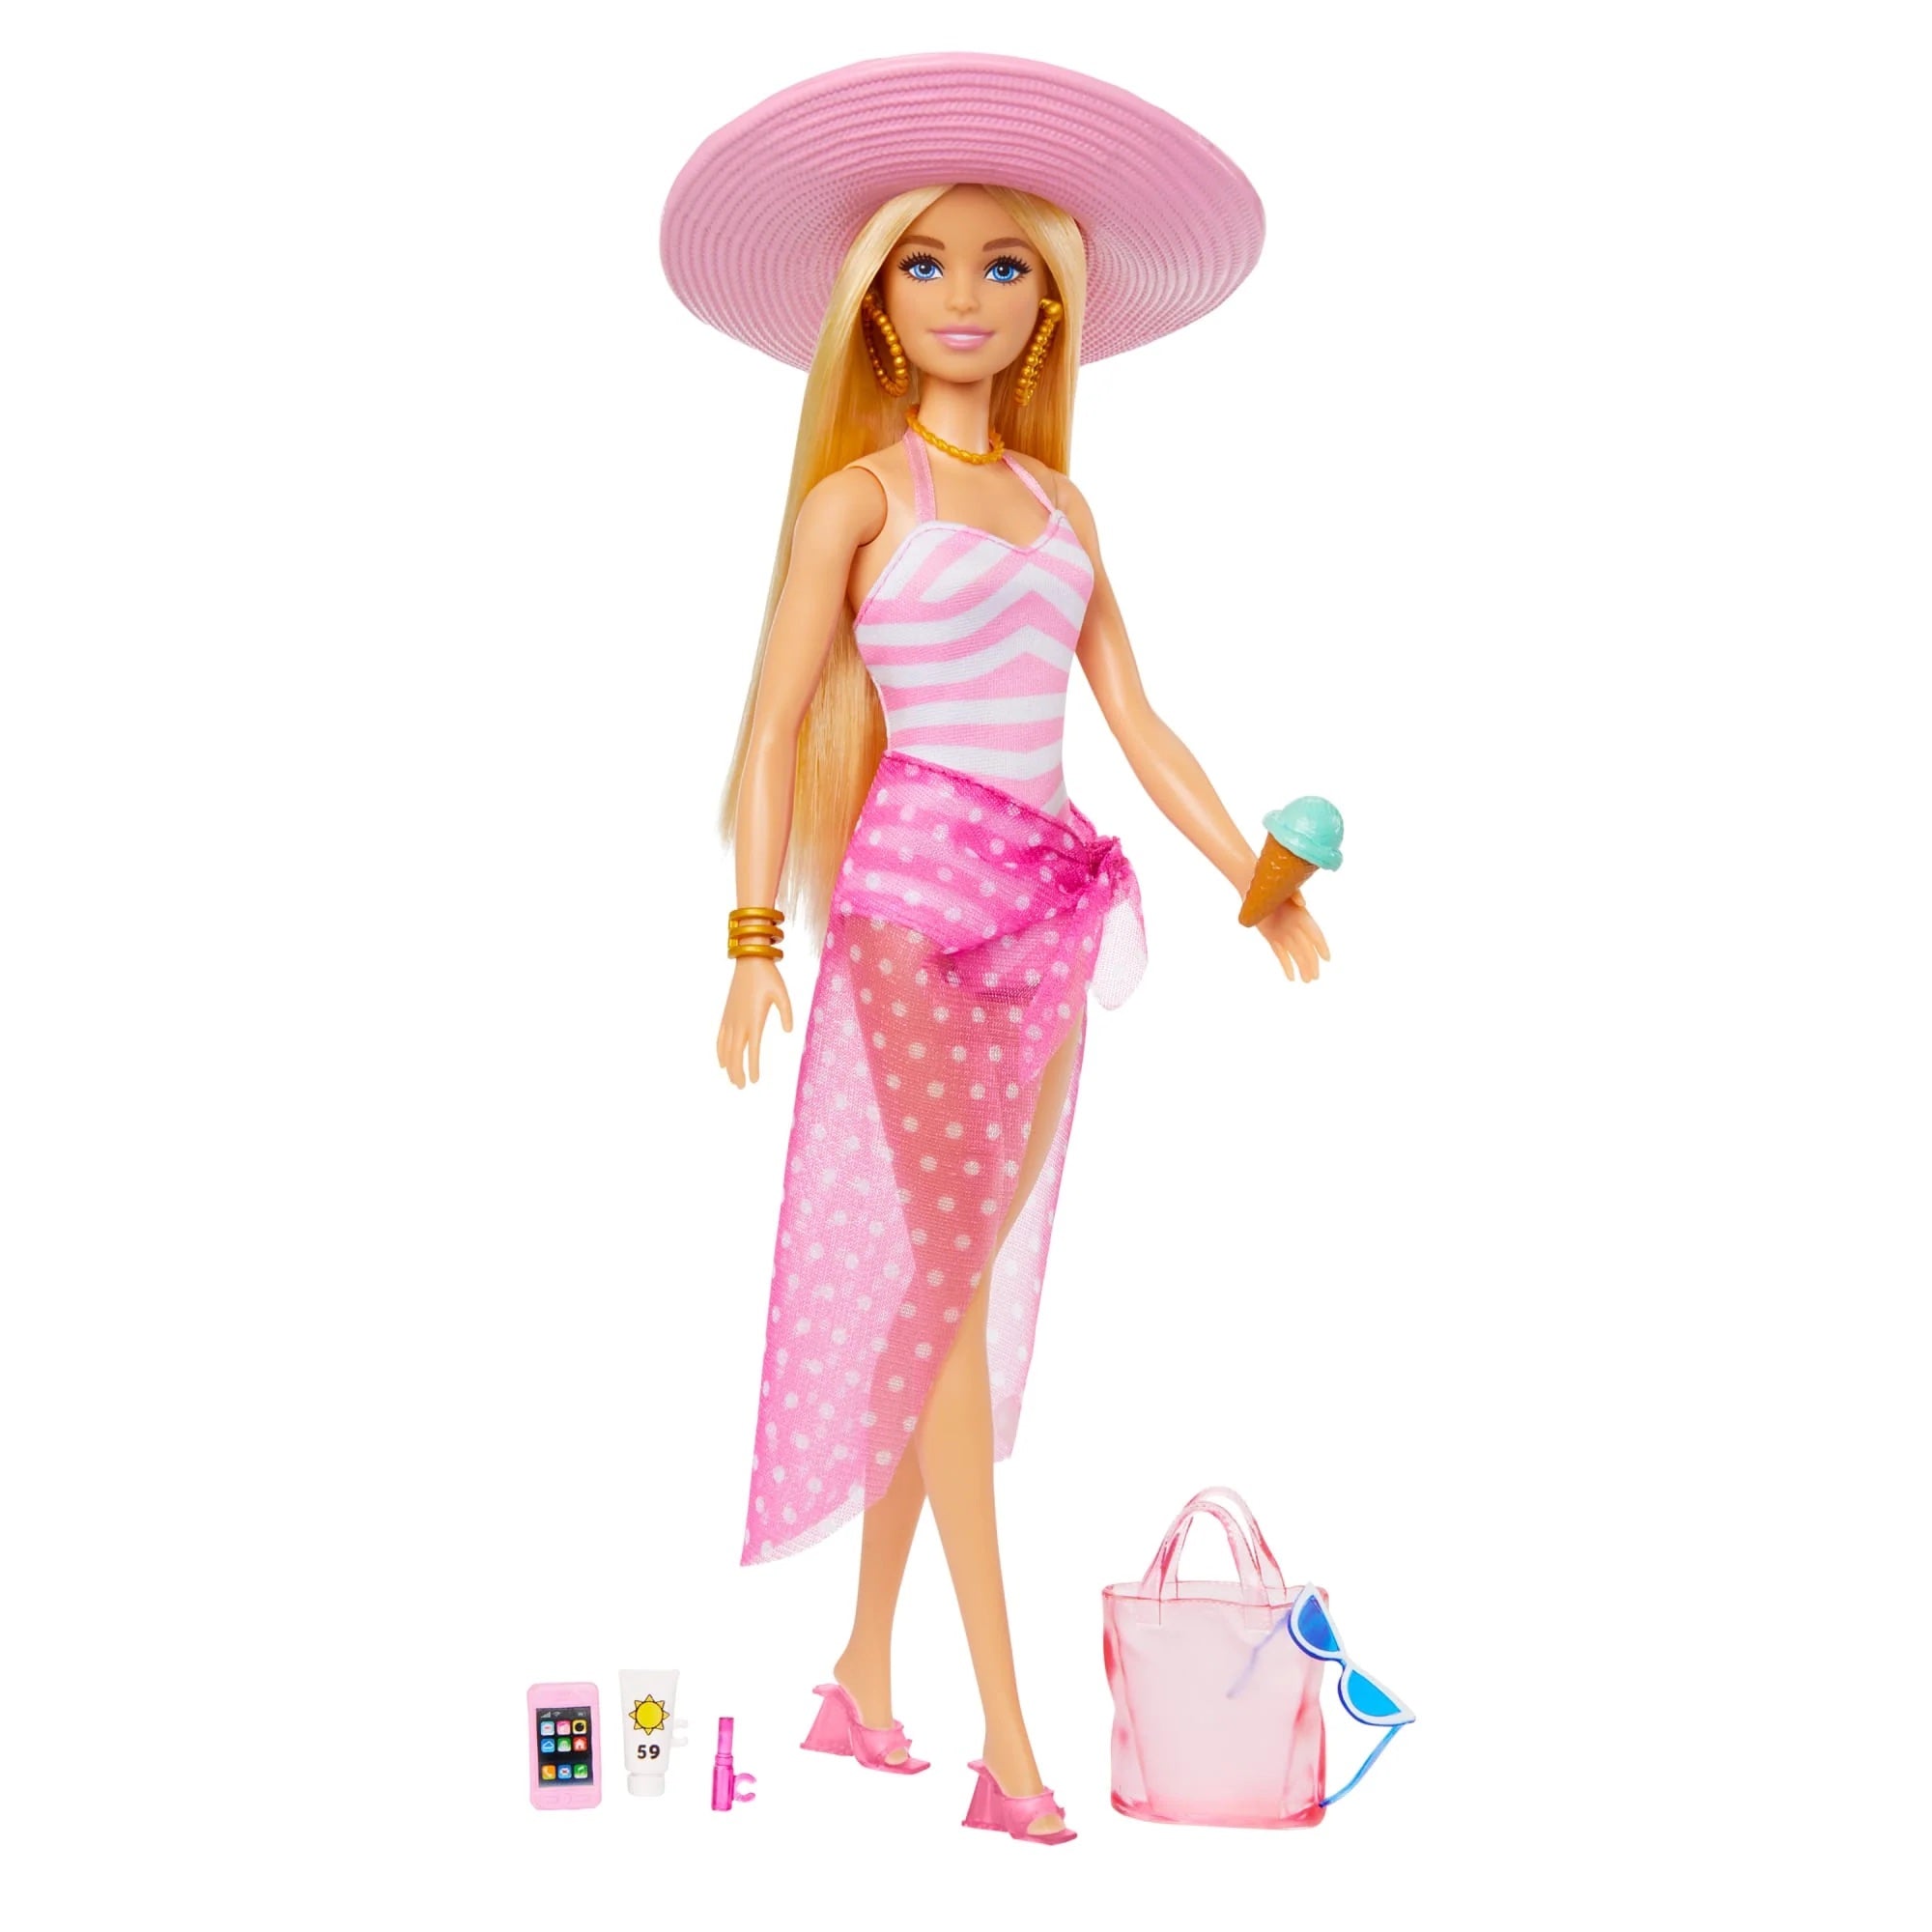 Image of Barbie Doll with Swimsuit and Beach Themed Accessories